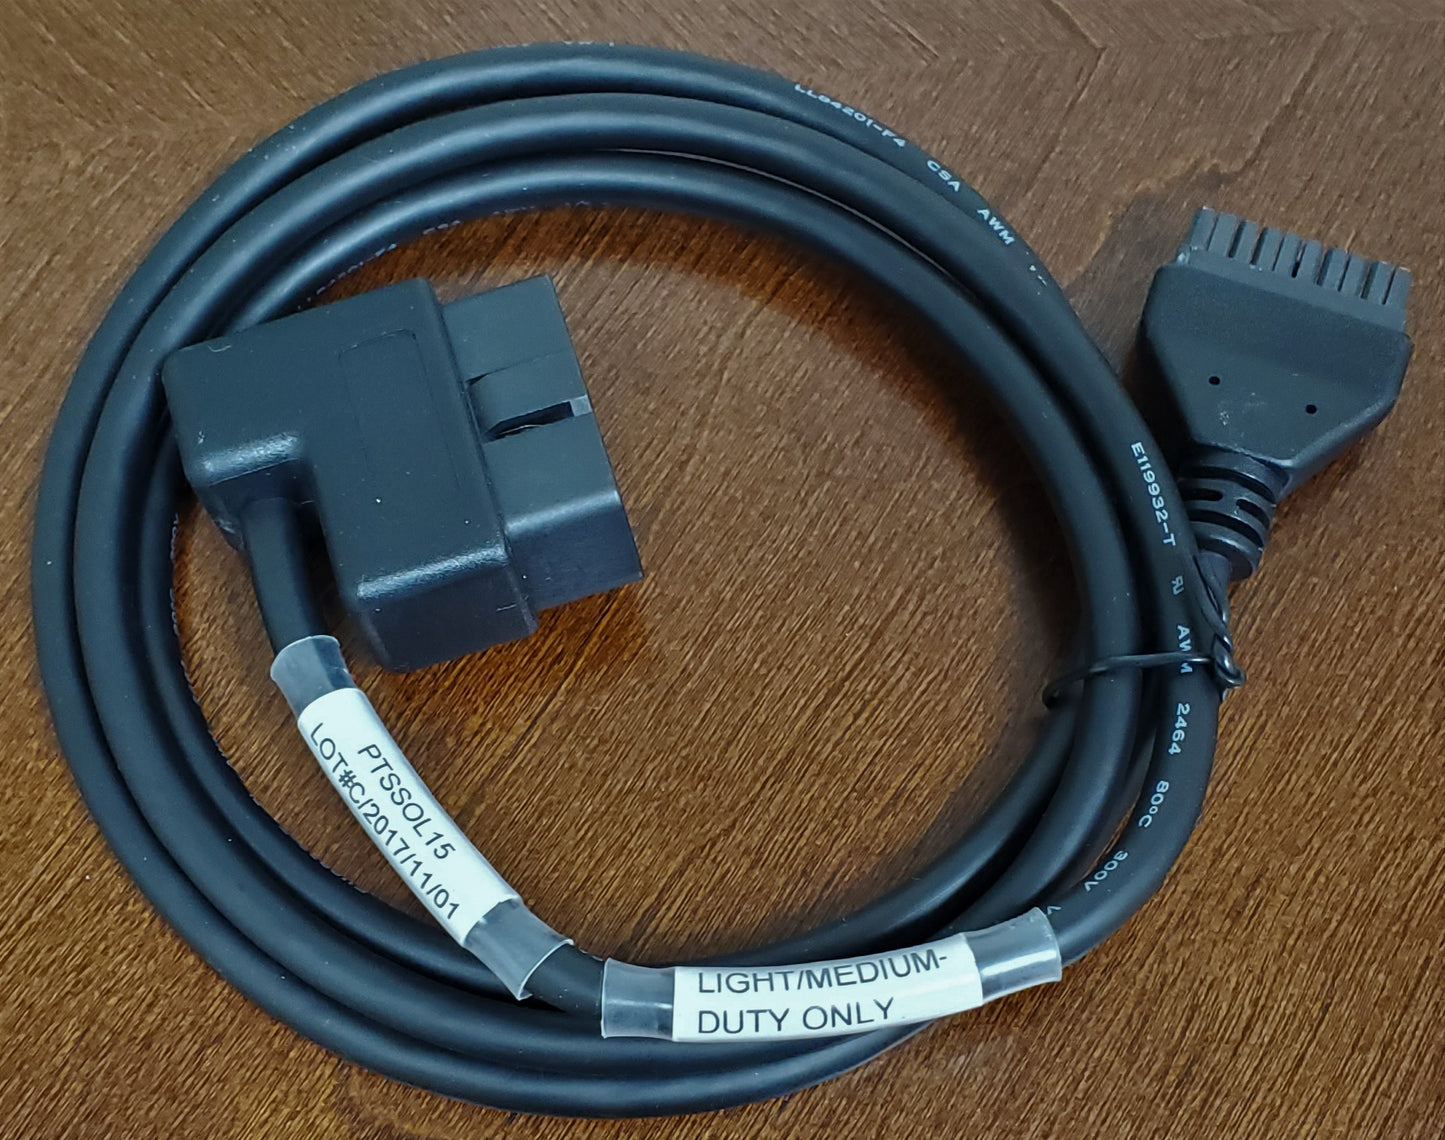 OBDII 16-PIN Cable (Light/Medium-Duty ONLY)